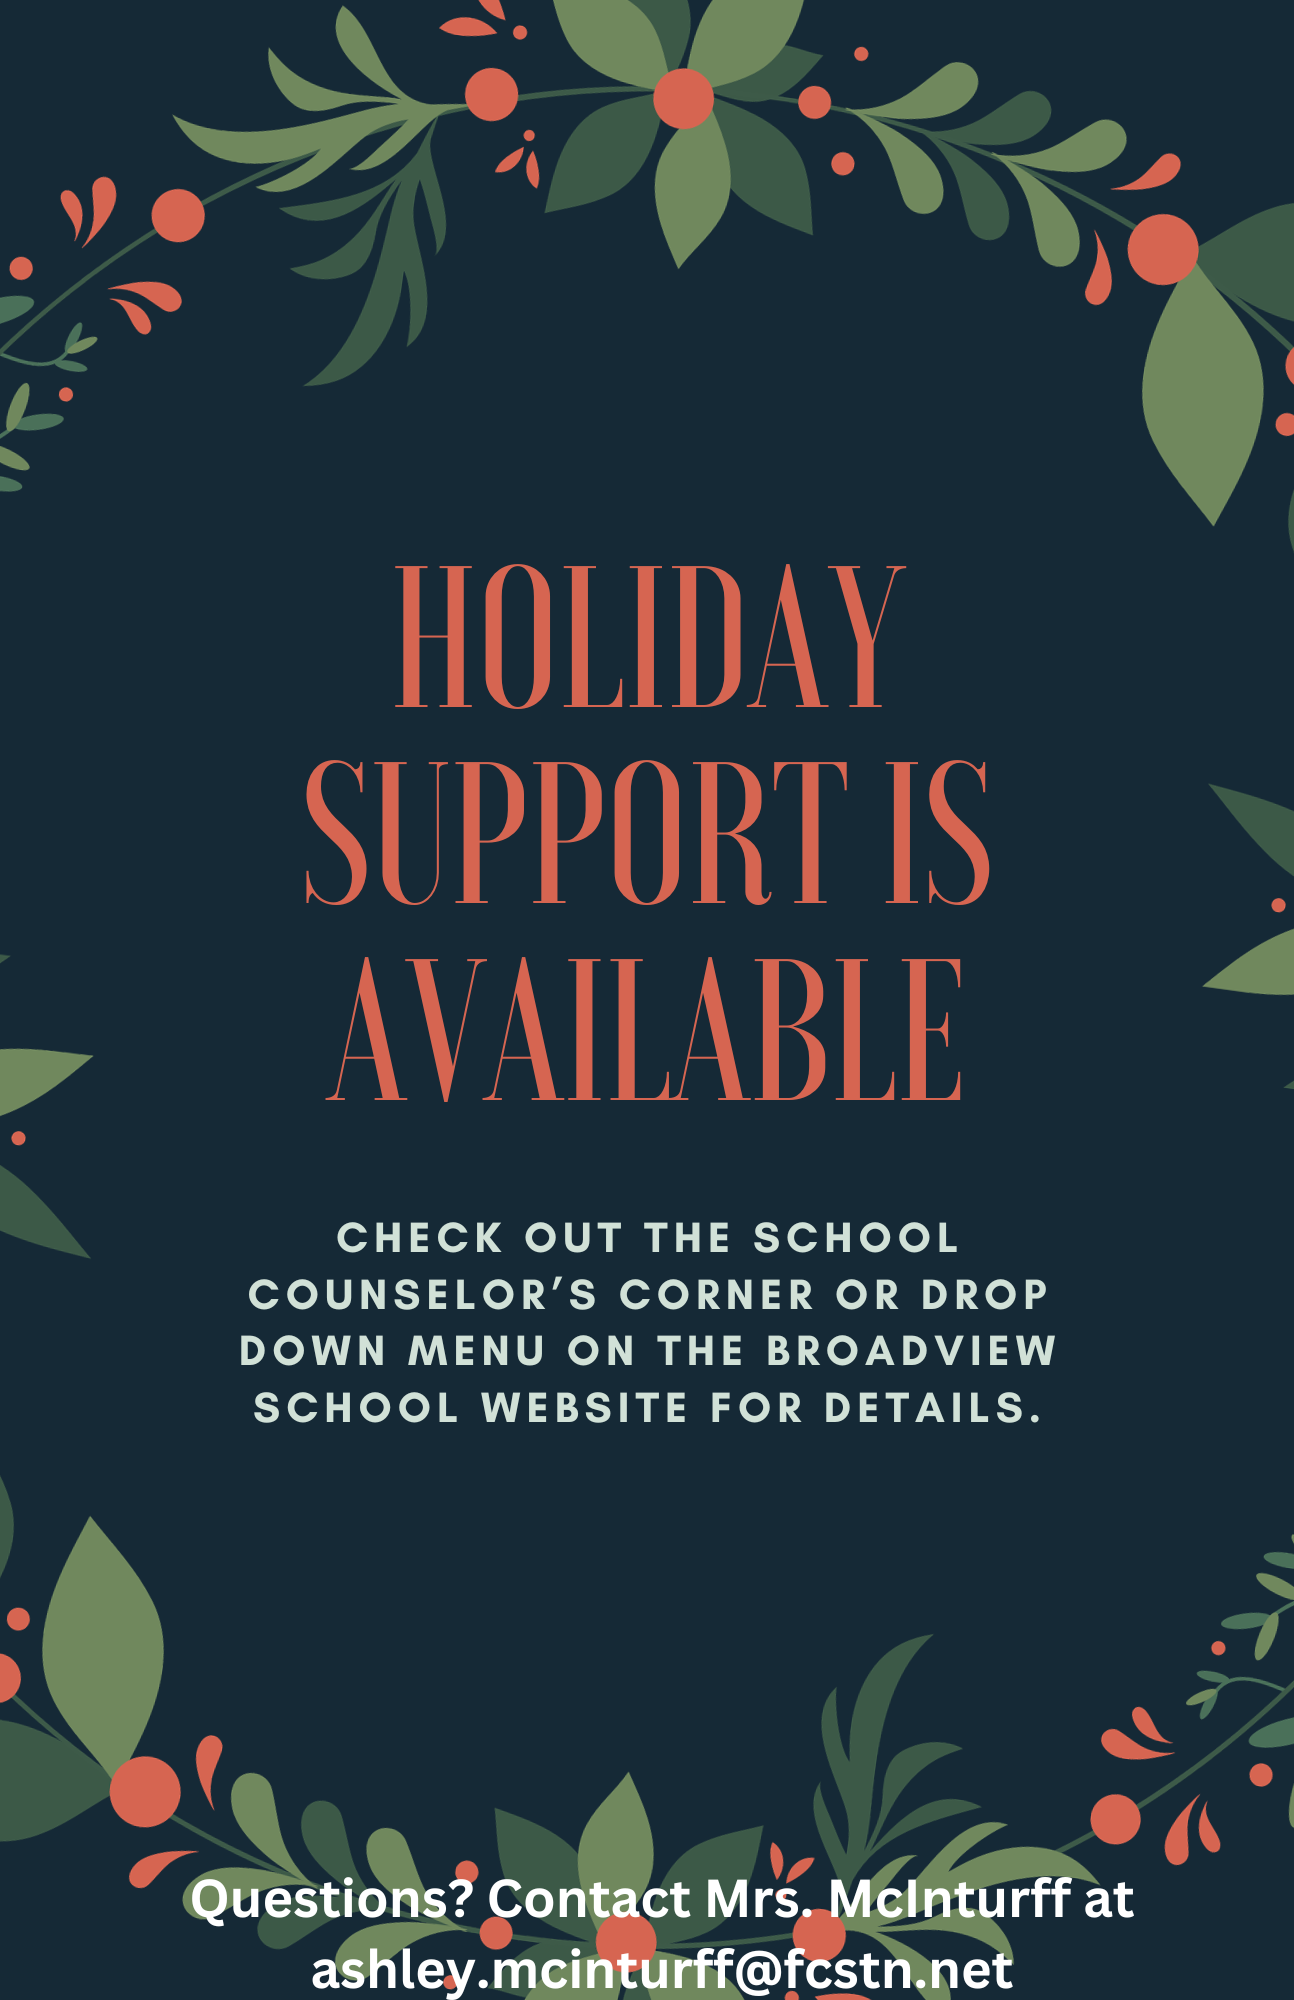 Holiday support is available! Check out the school counselor's corner or drop down menu on the Broadview School Website for Details. Questions? Contact Mrs. McInturff at ashley.mcinturff@fcstn.net